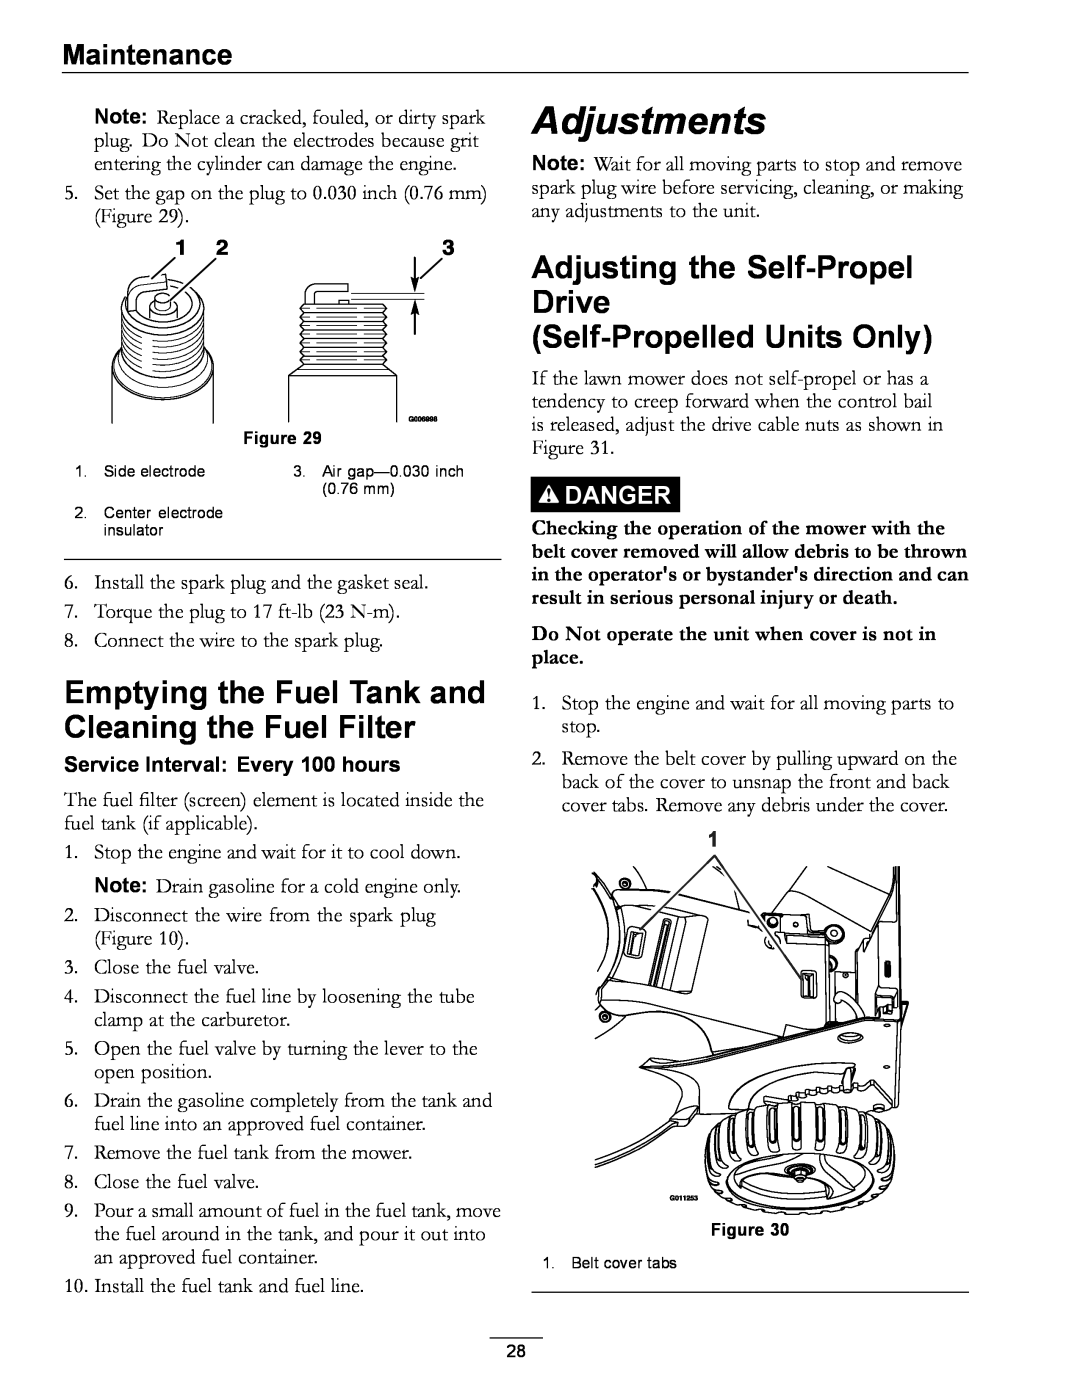 Exmark COMMERCIAL 21 manual Adjustments, Emptying the Fuel Tank and Cleaning the Fuel Filter, Maintenance, Danger 